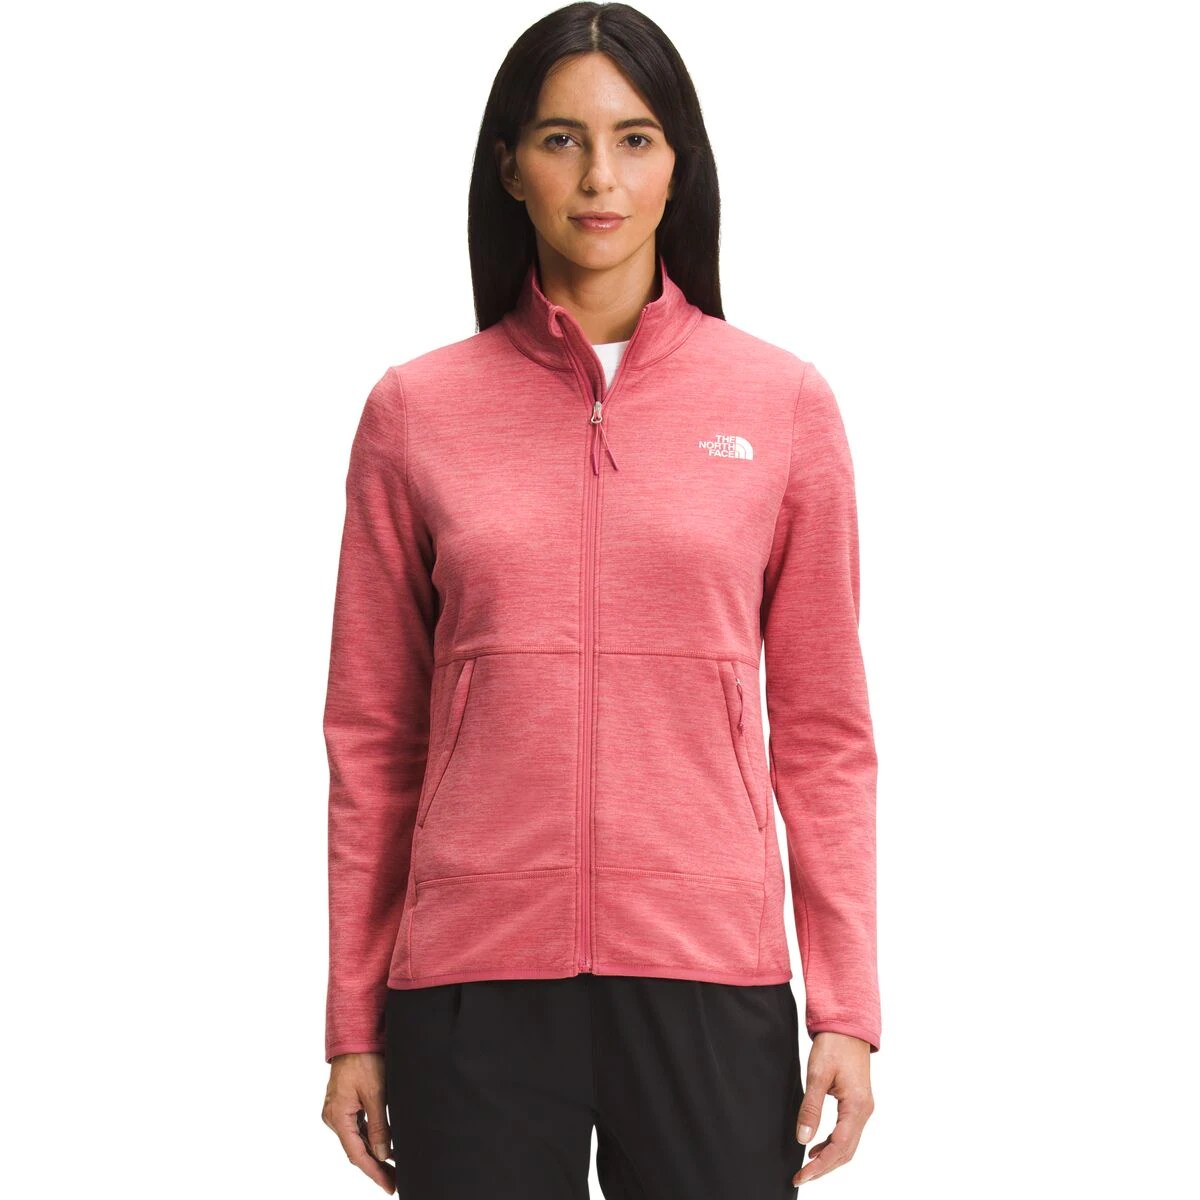 model wearing The North Face, Canyonlands Full-Zip Jacket in heather pink which is now on sale at backcountry